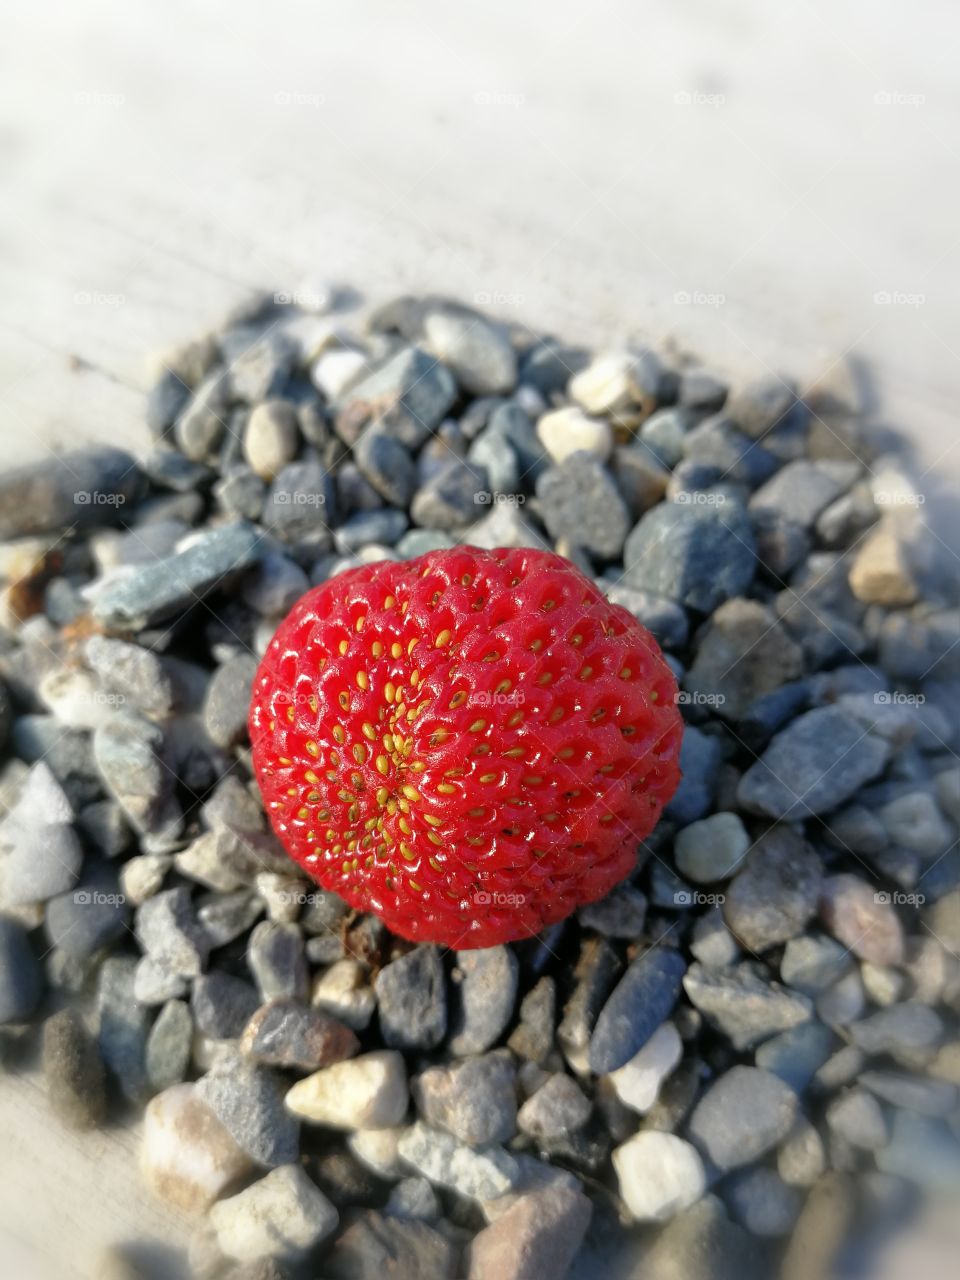 2 strawberries on a bed of pebbles